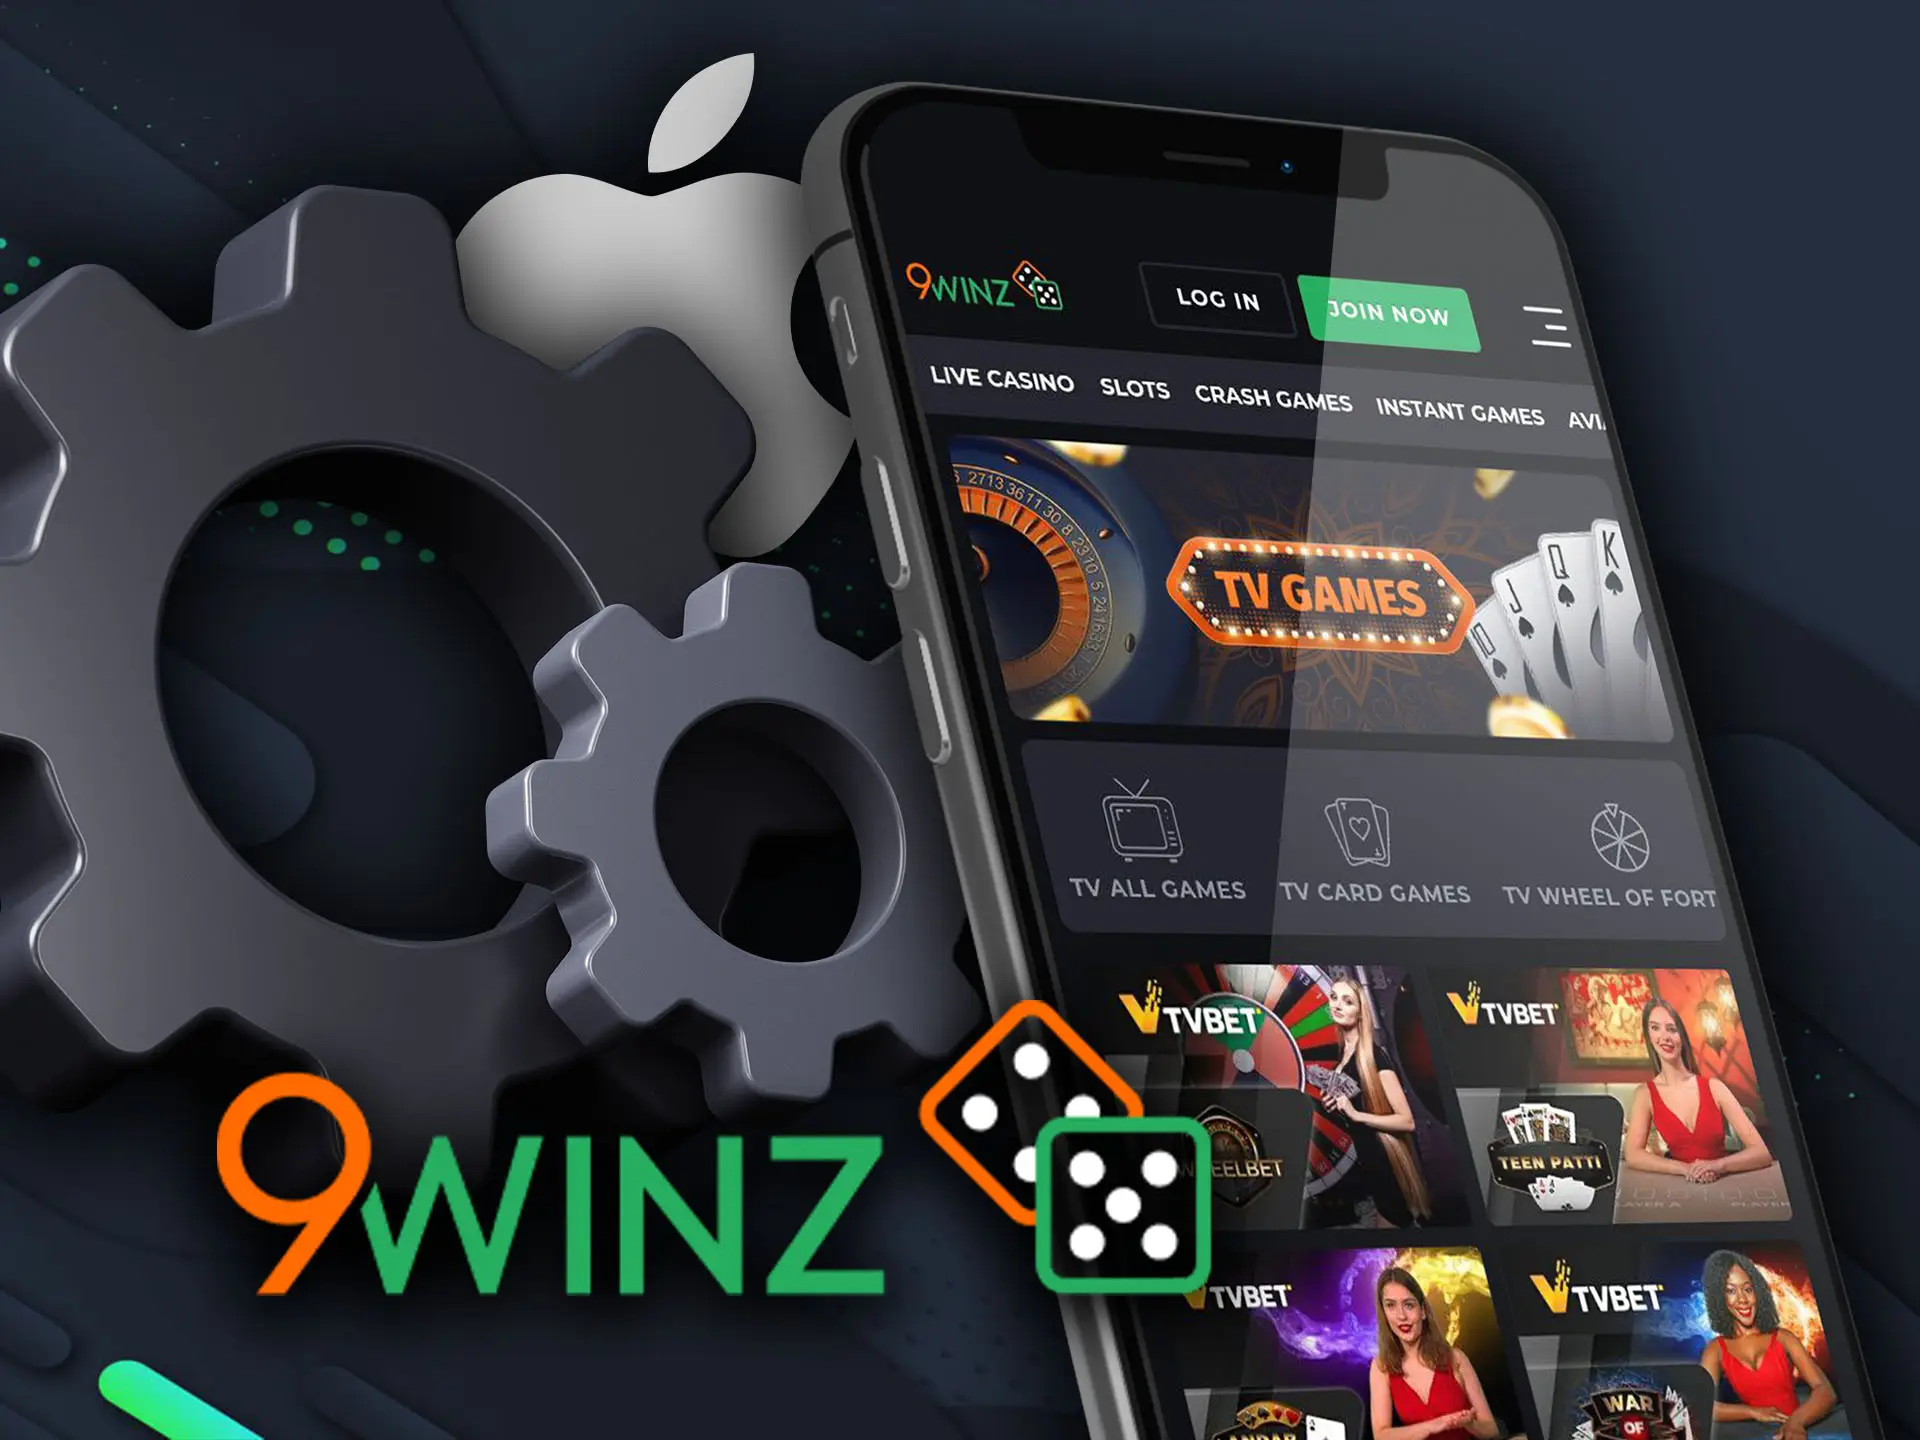 Use 9winz mobile version for iOS without requirements.